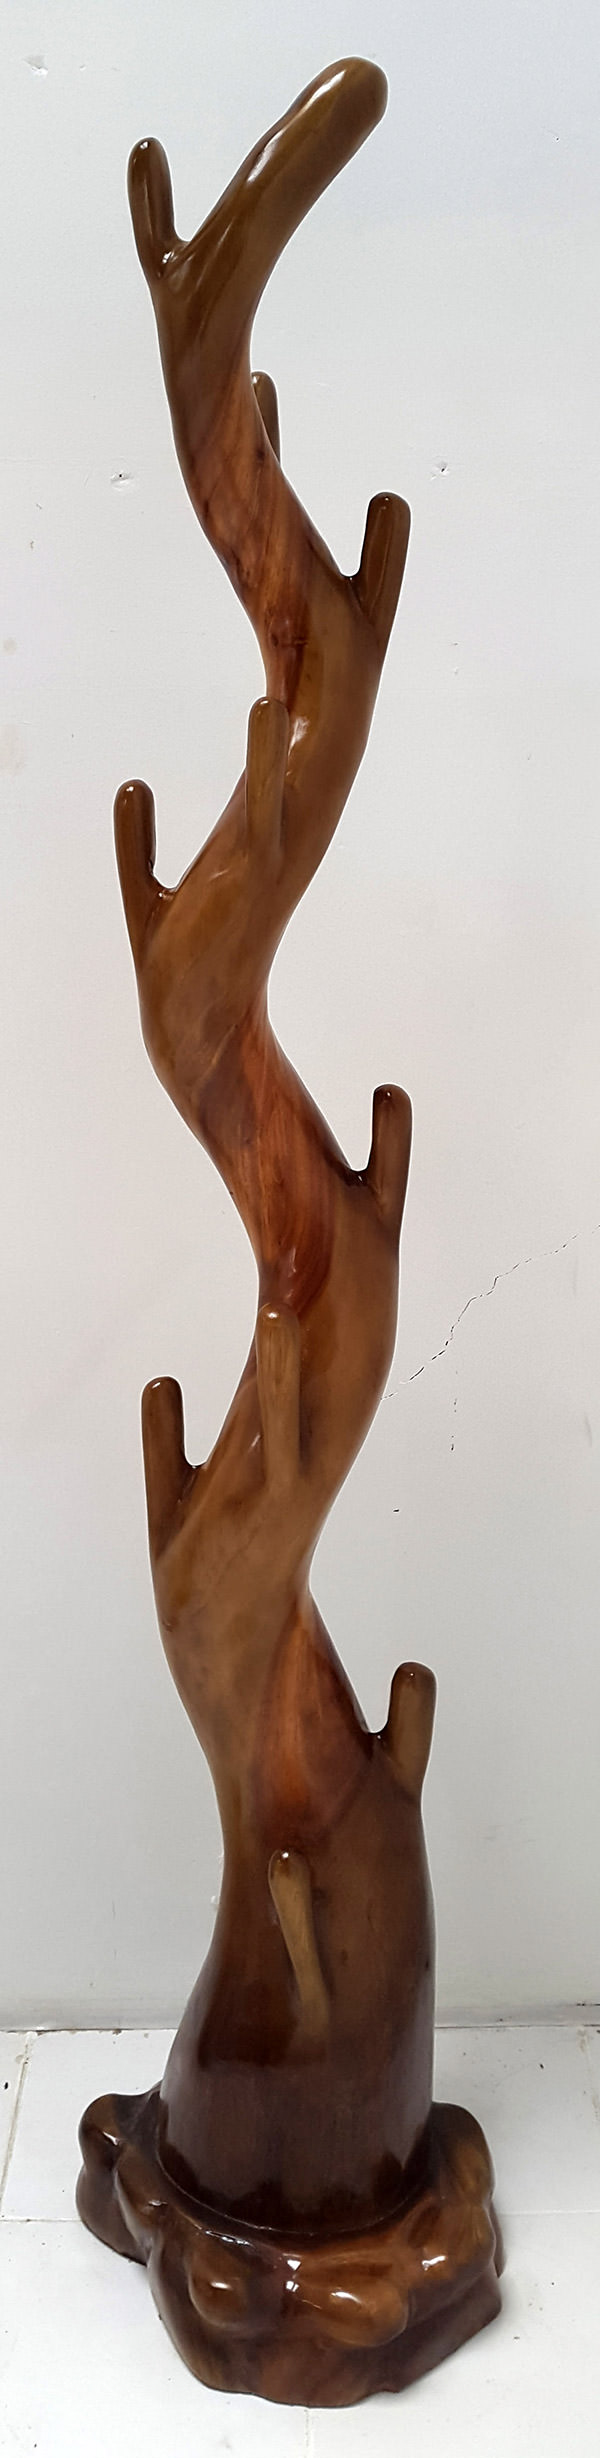 suar coat hanger with brown stain